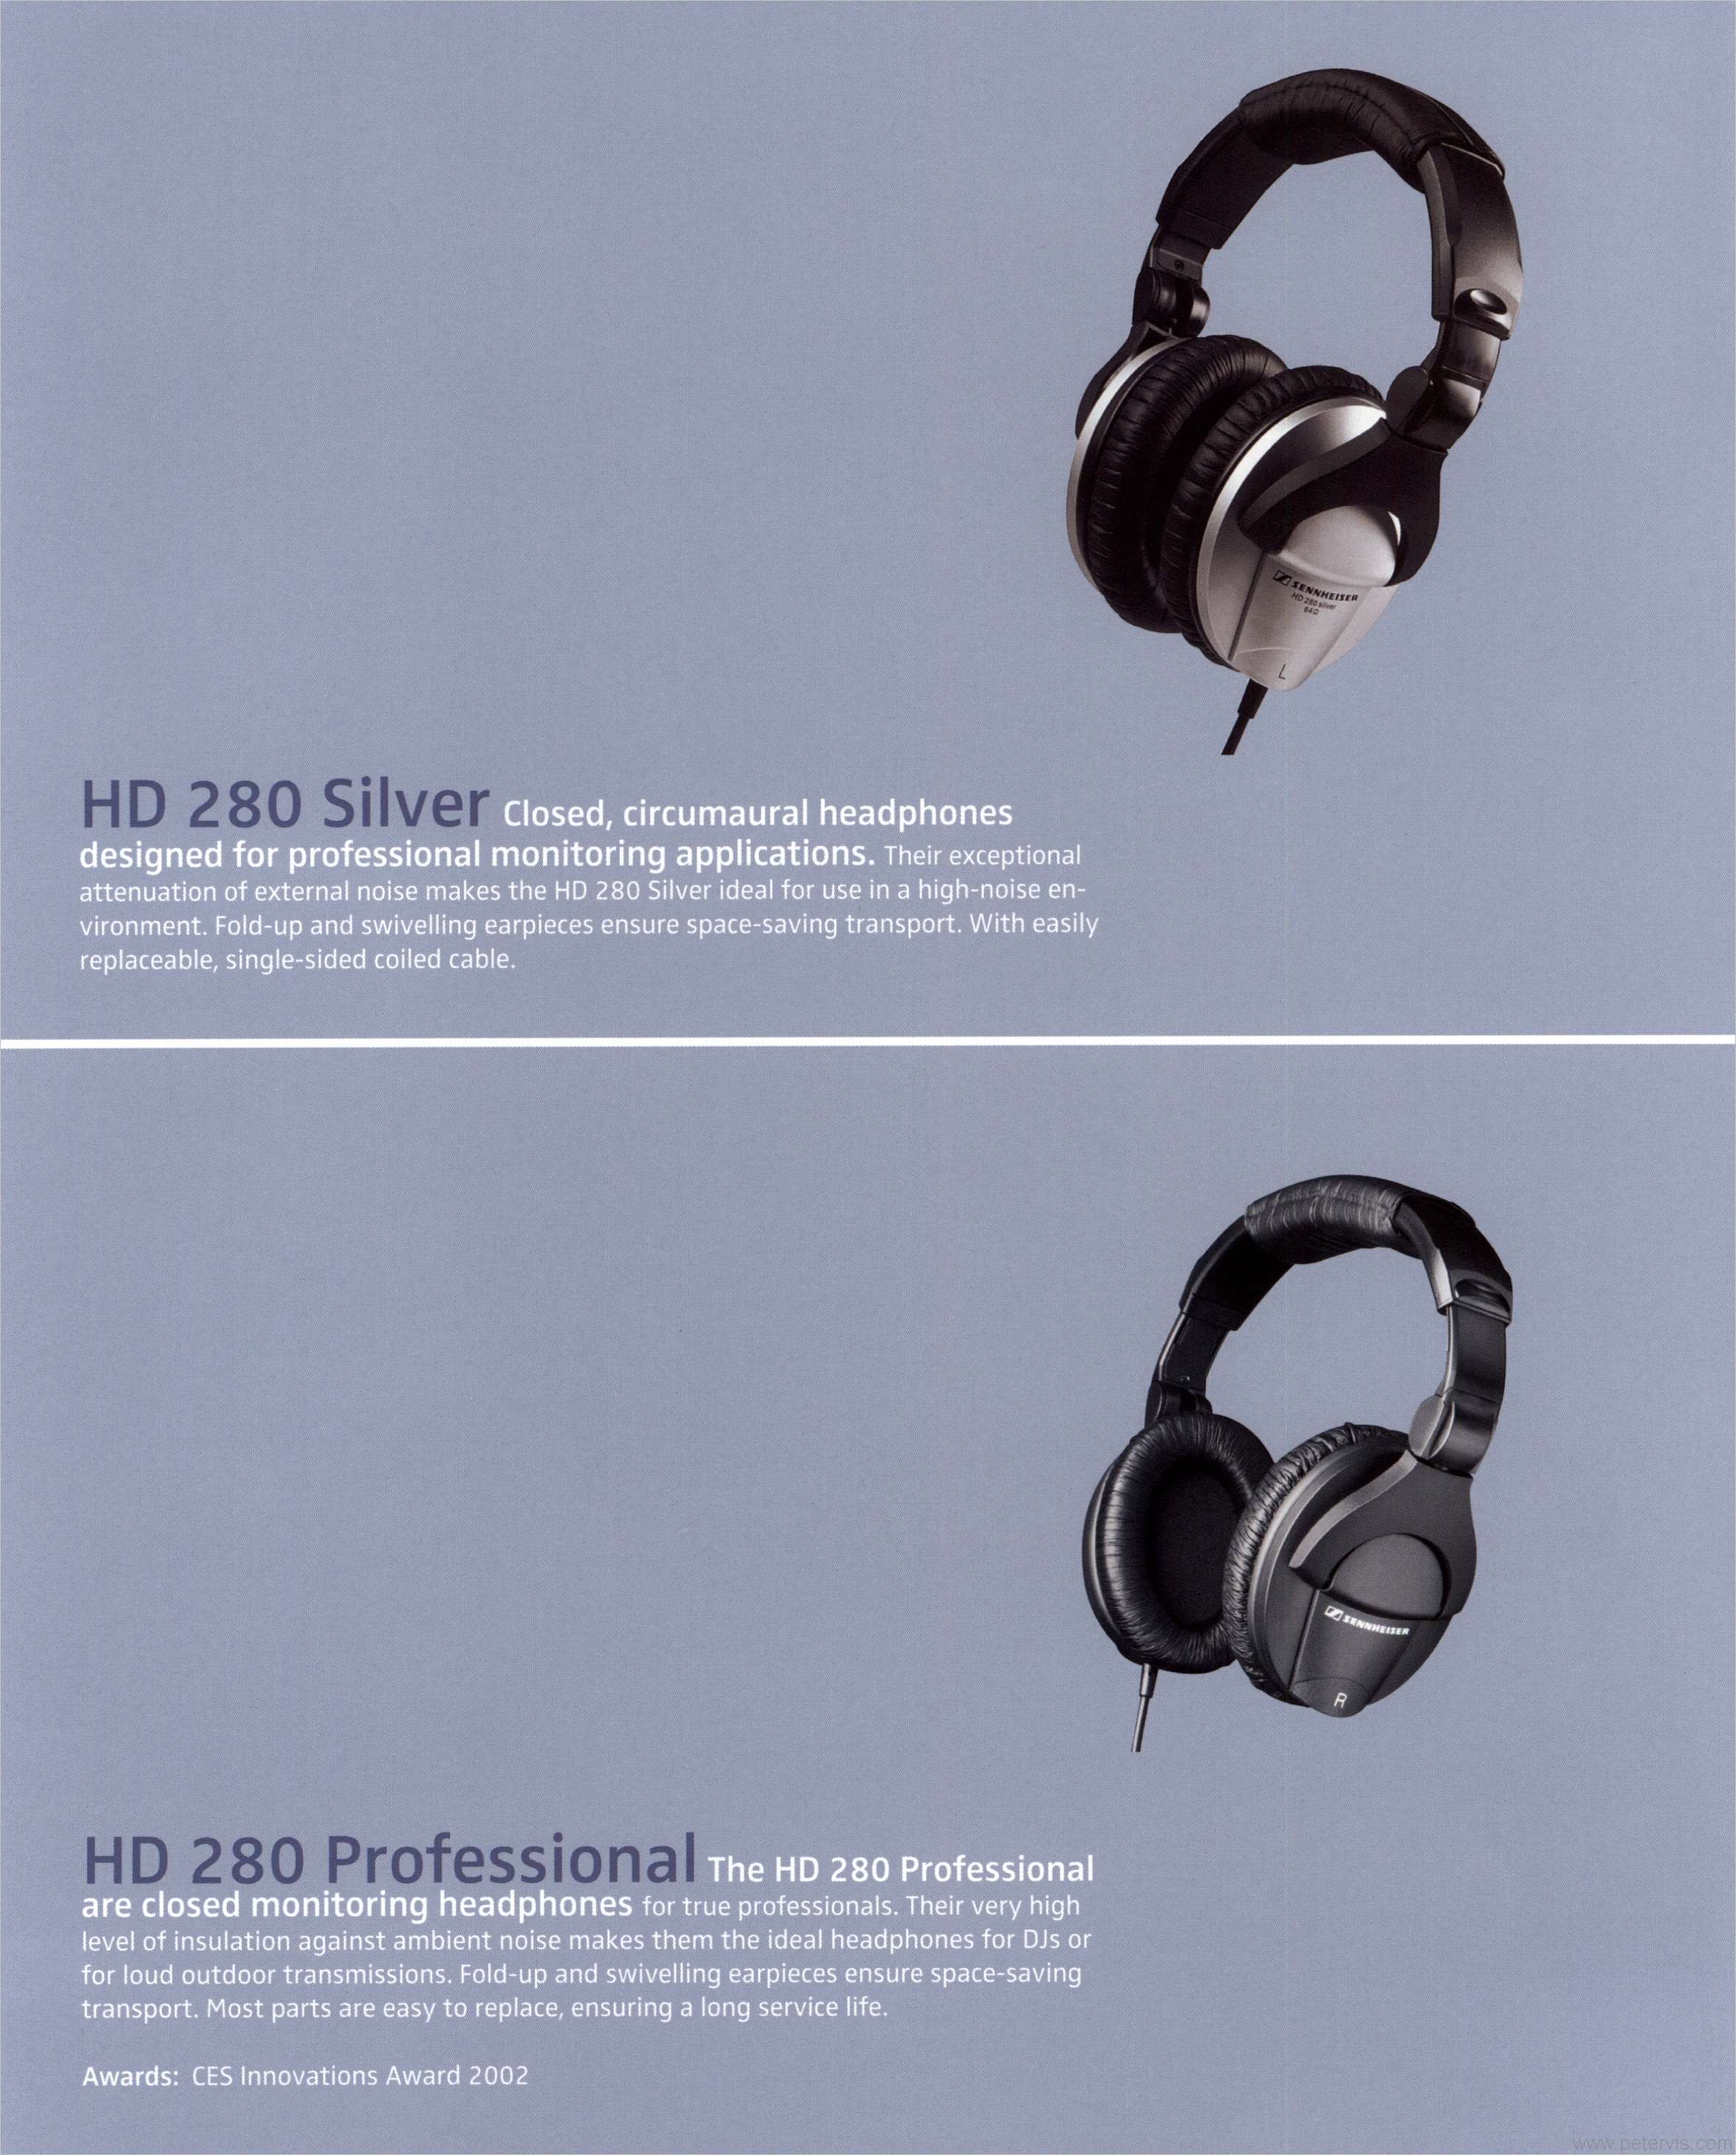 HD 280 SILVER AND HD 280 PROFESSIONAL